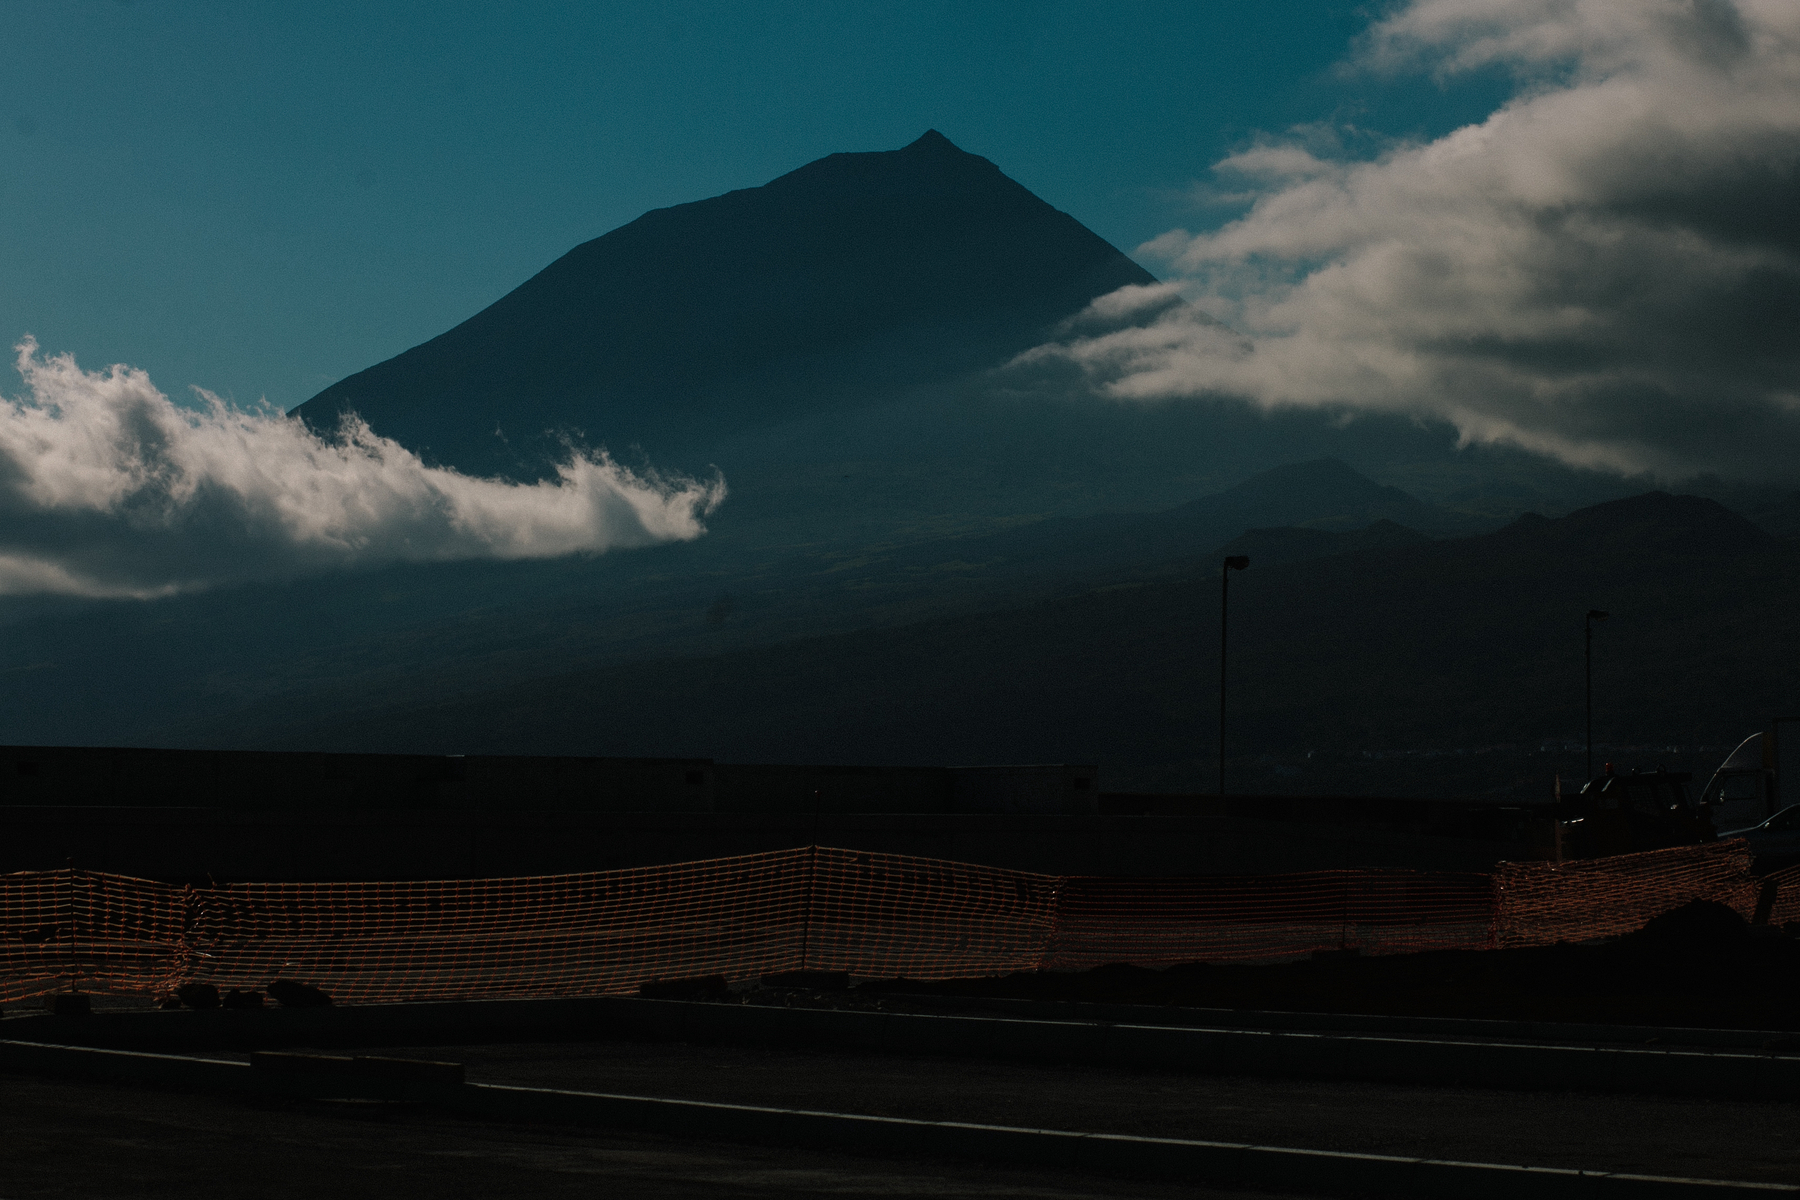 A majestic mountain looms in the distance, partially shrouded by clouds, under a blue sky. In the foreground, there is a fence and the edge of a paved area, possibly a road or parking lot. The lighting suggests either dawn or dusk. 